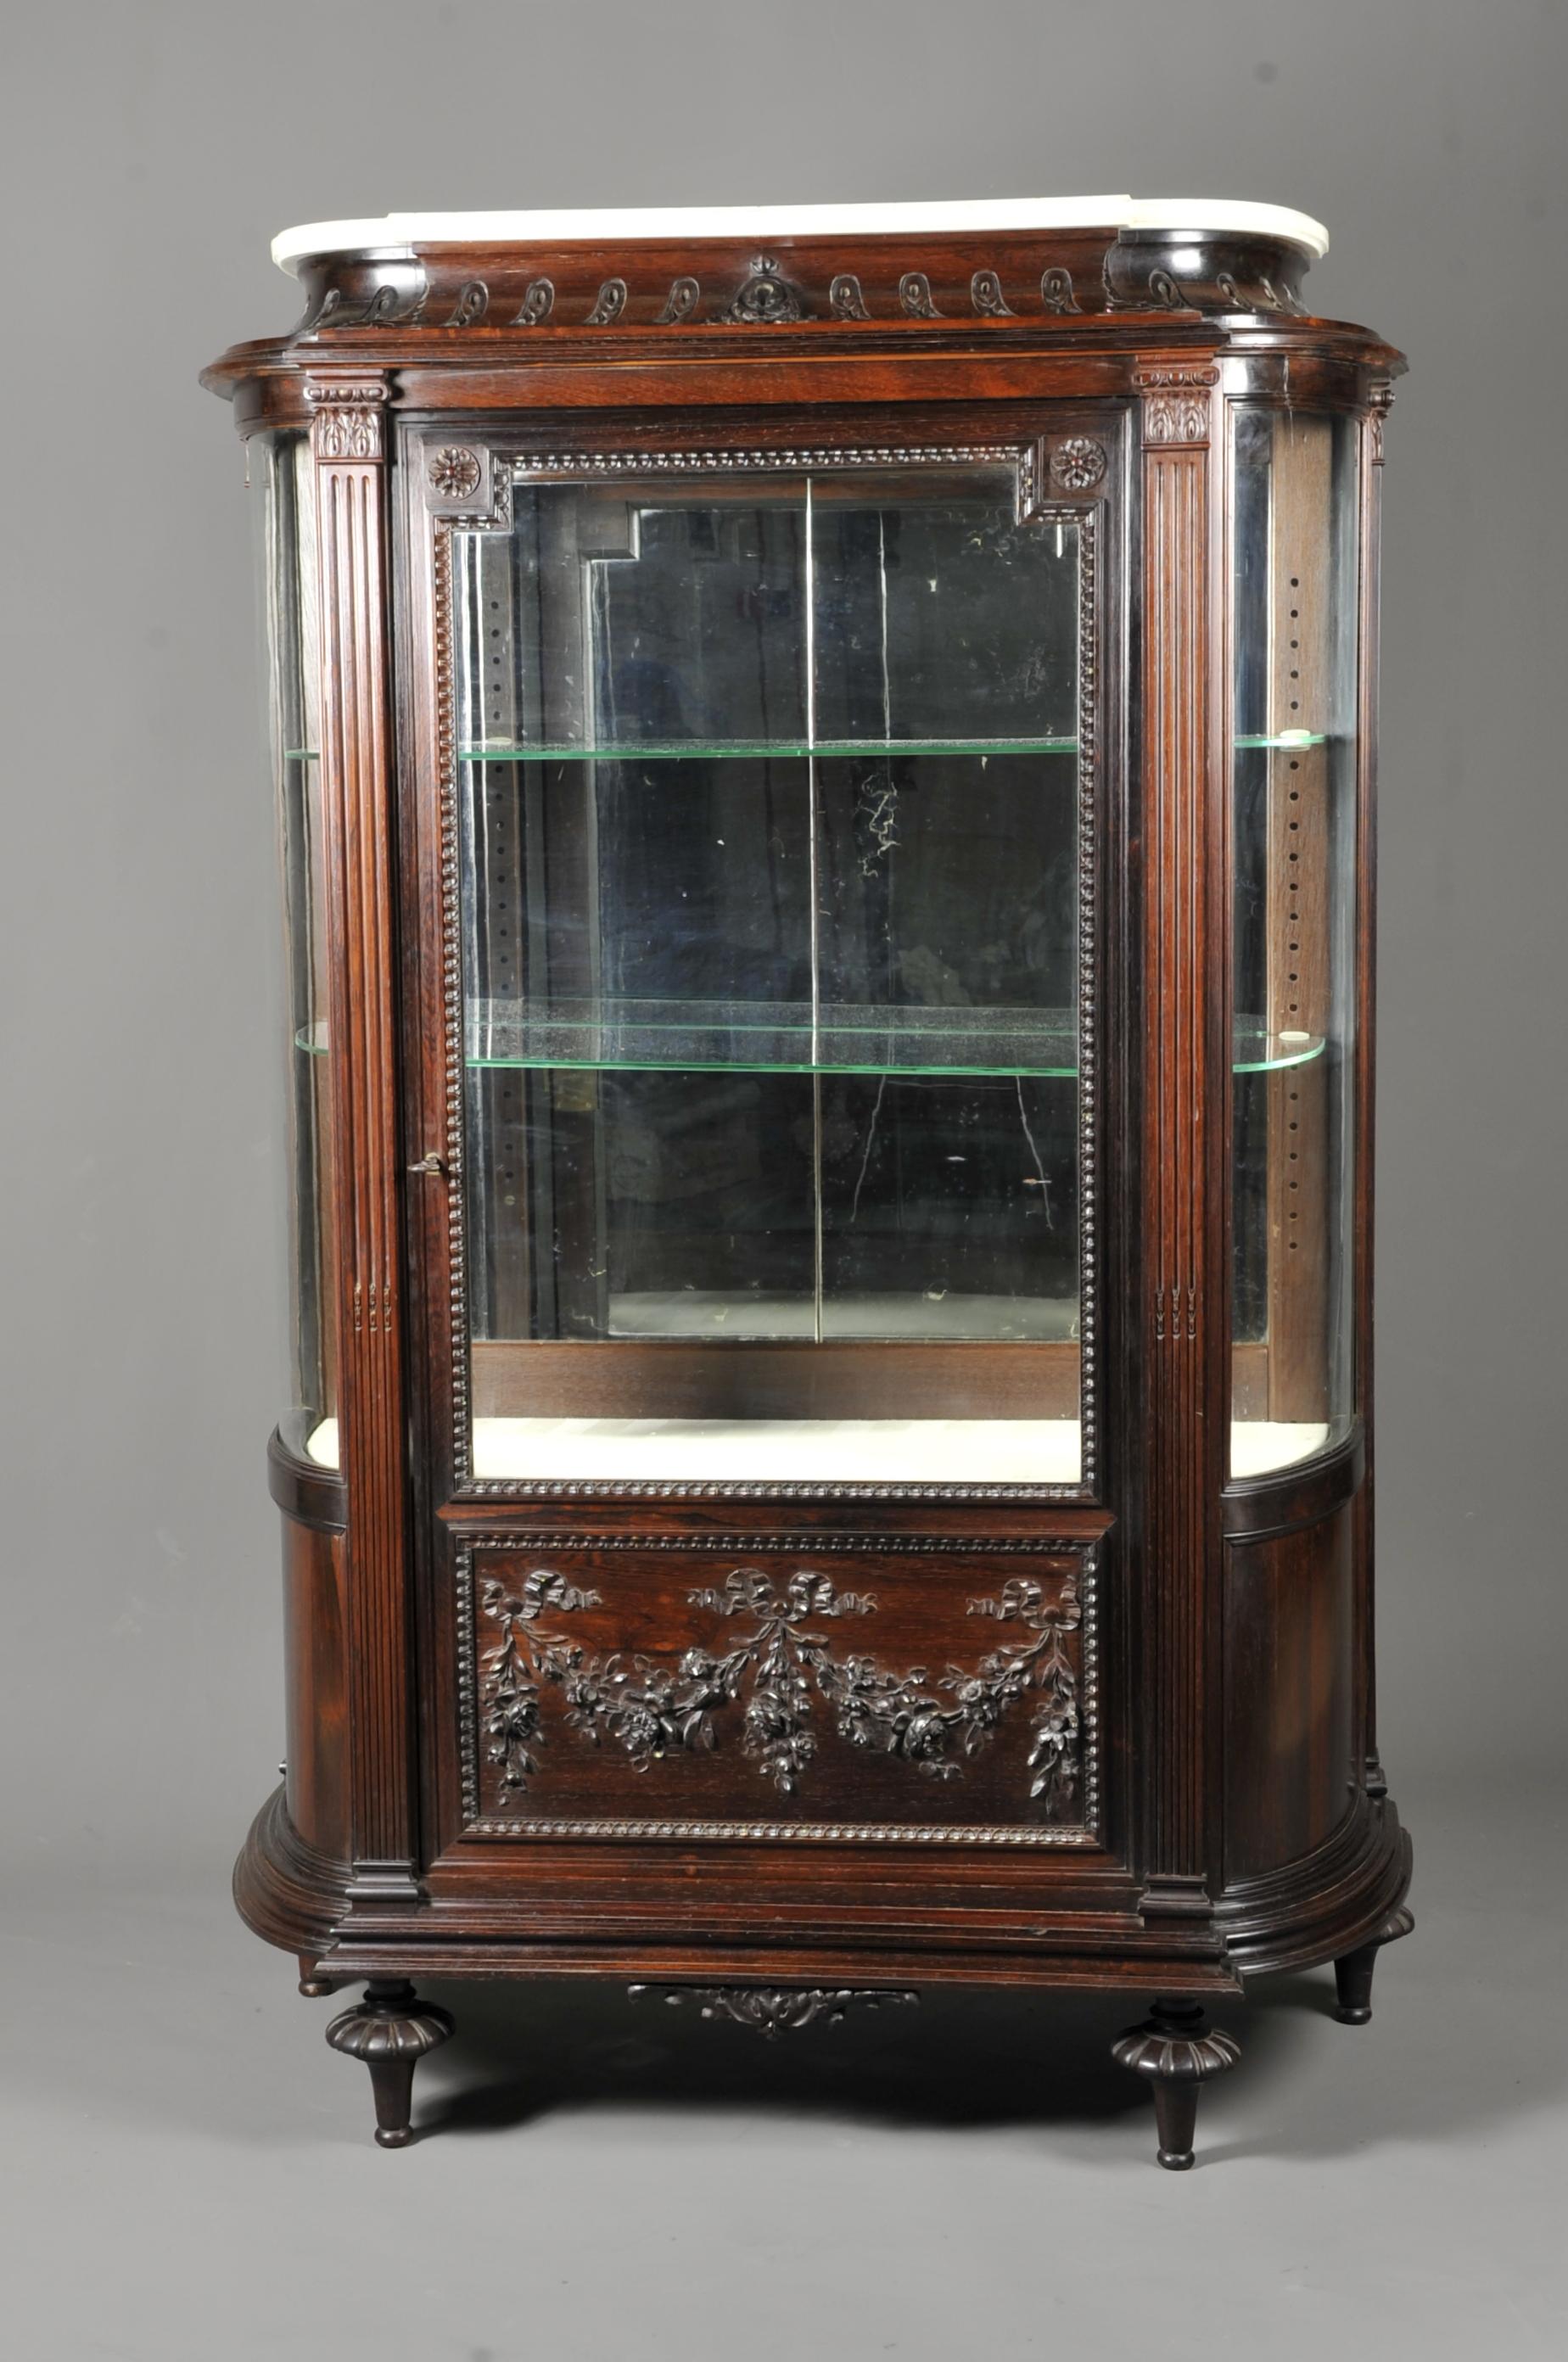 Rare Louis XVI showcase made of very finely carved solid rosewood. Opening a front door decorated with floral garlands and heart-shaped friezes, the sides are domed and delimited by two fluted pilasters ending in a neoclassical capital. In the upper